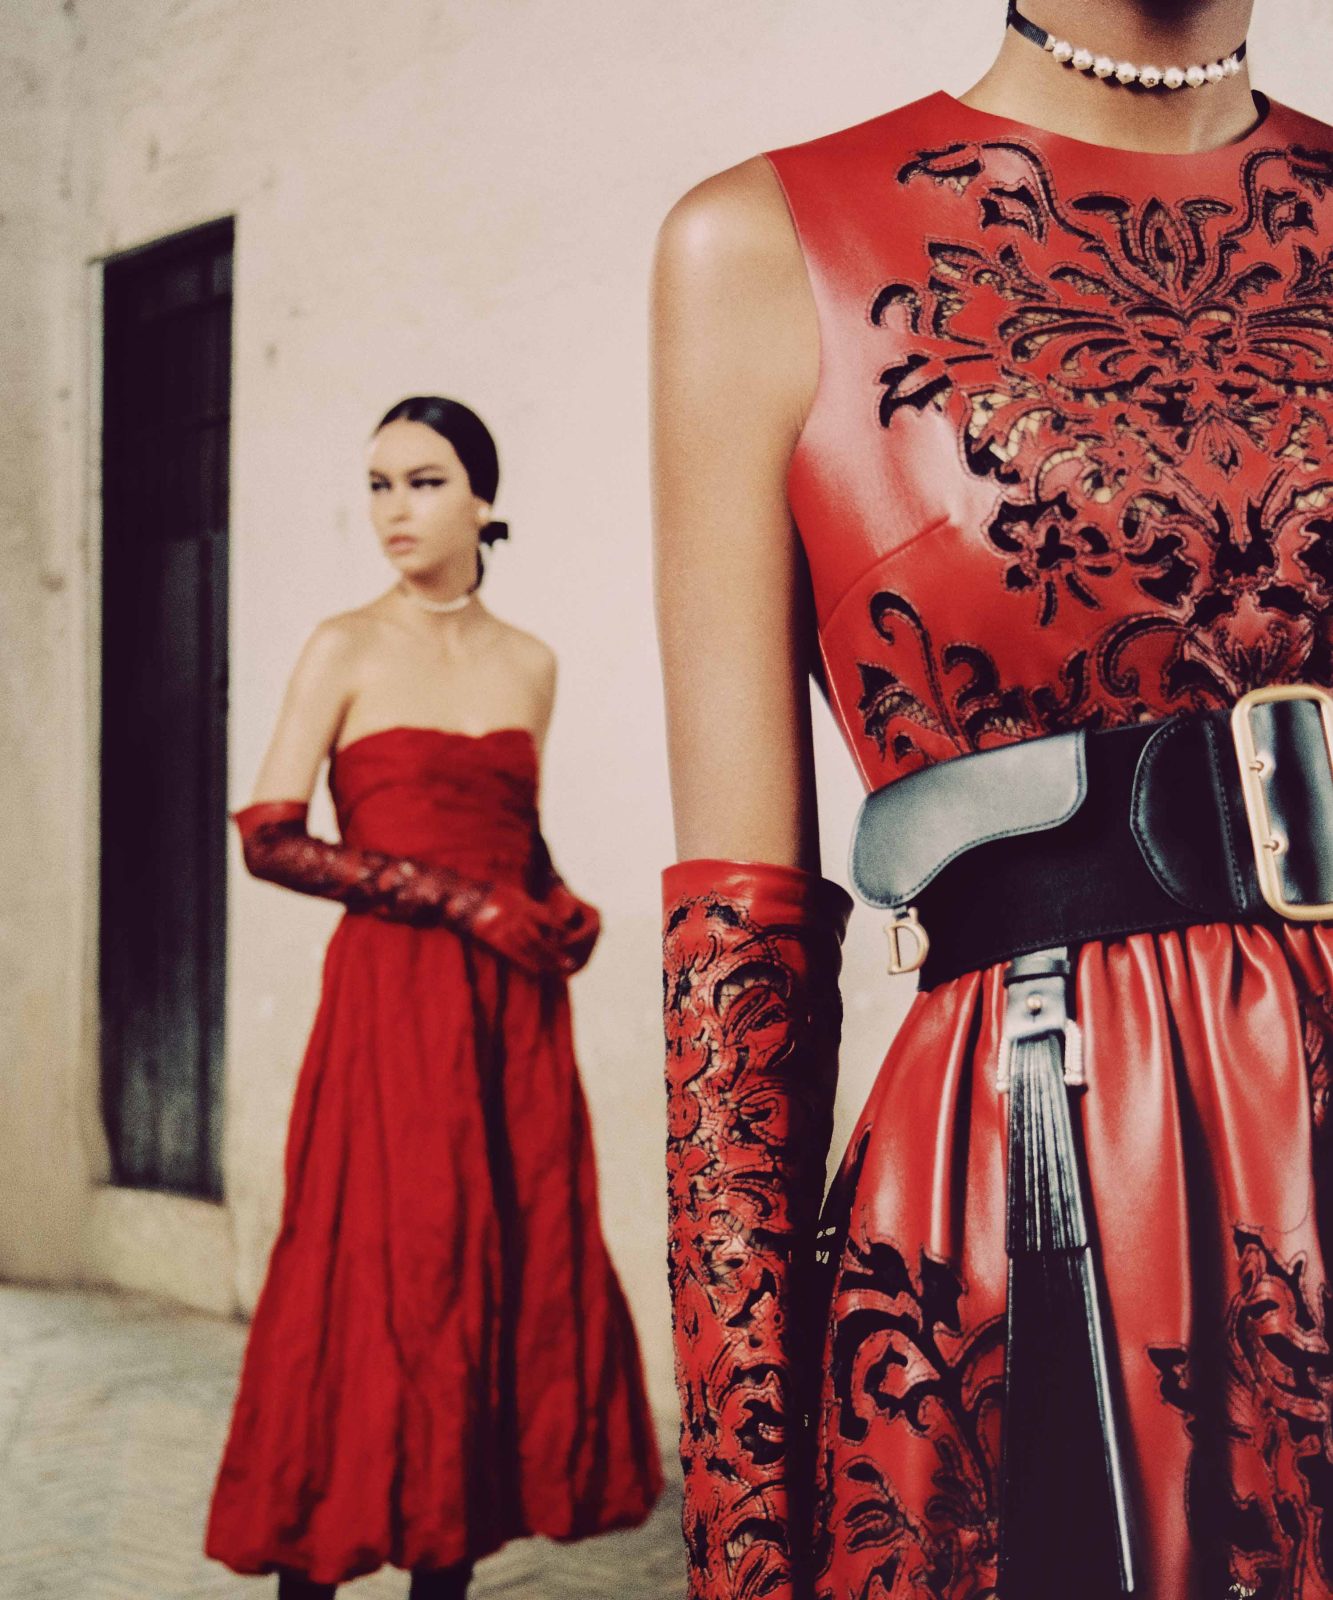 The Soul Of Sevilla: Haute Living's Exclusive Editorial Featuring The Christian Dior 2023 Cruise Collection